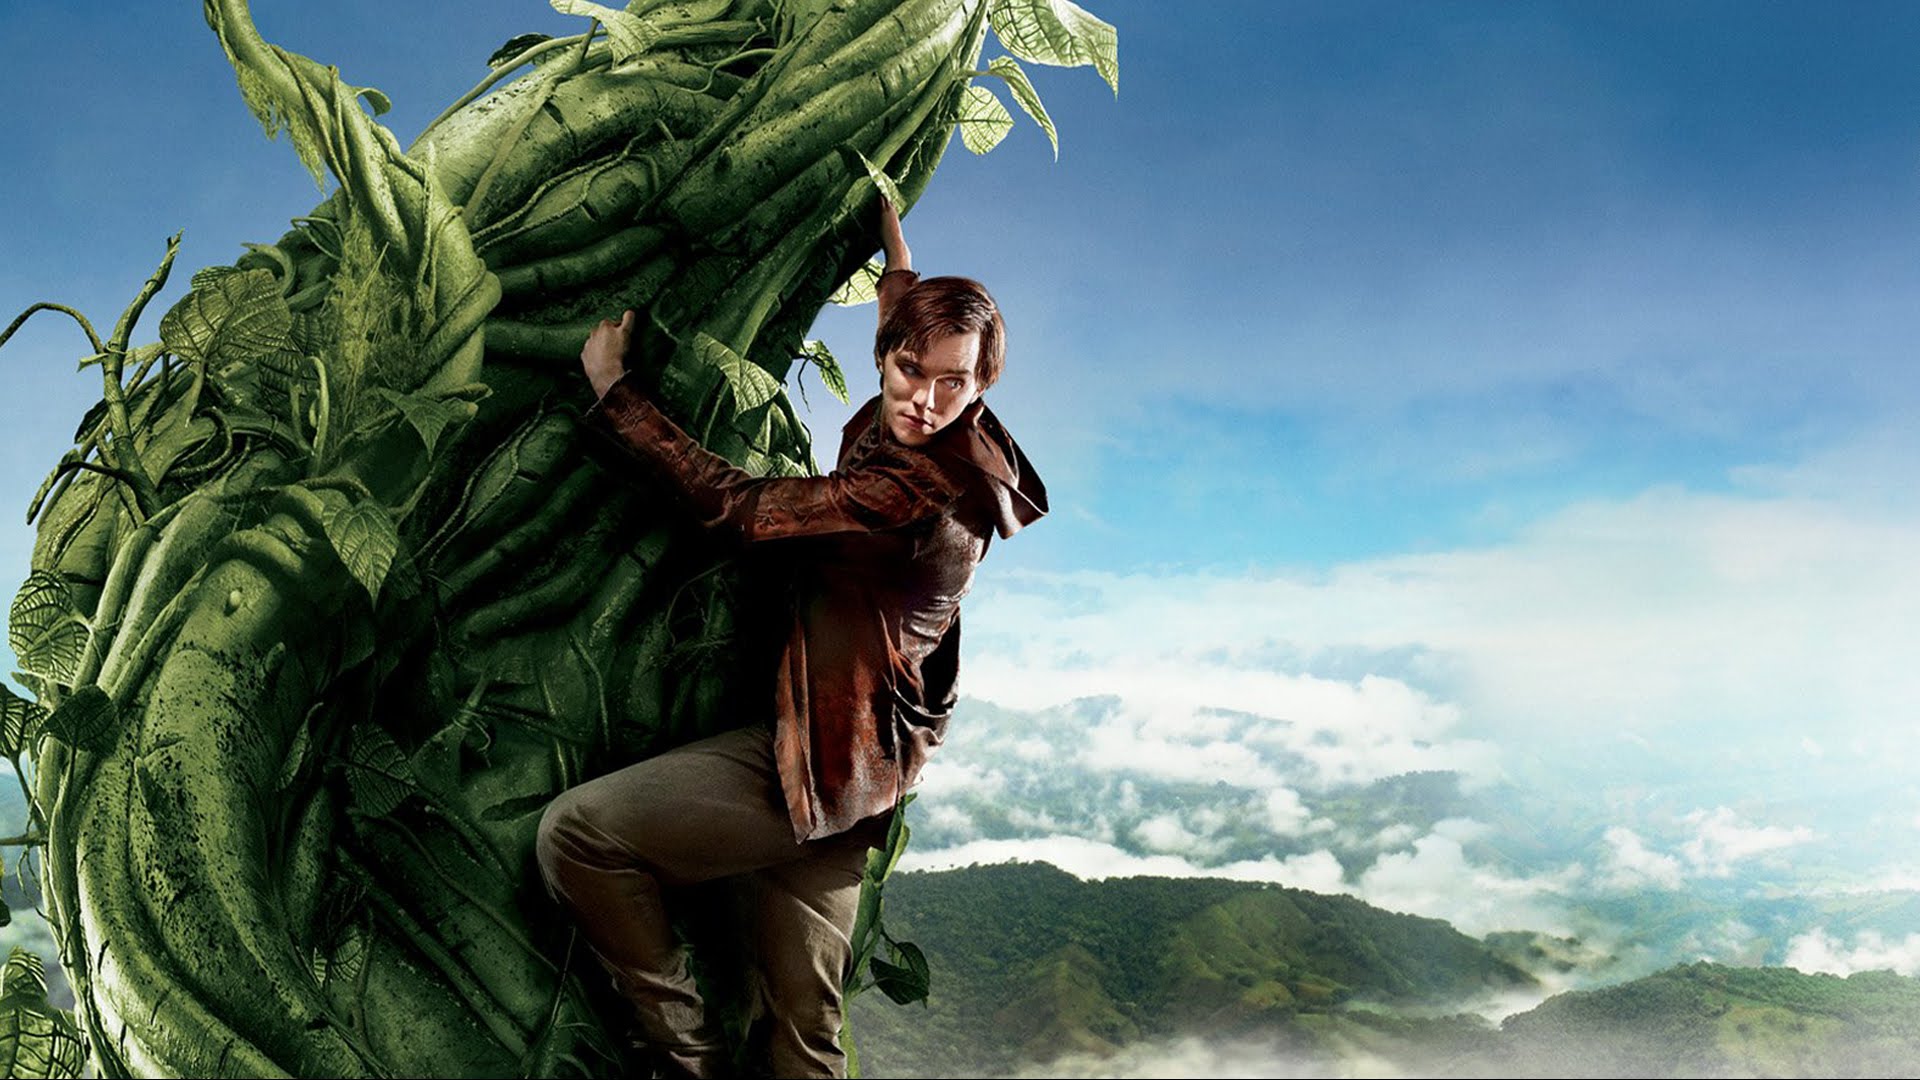 Nice wallpapers Jack The Giant Slayer 1920x1080px